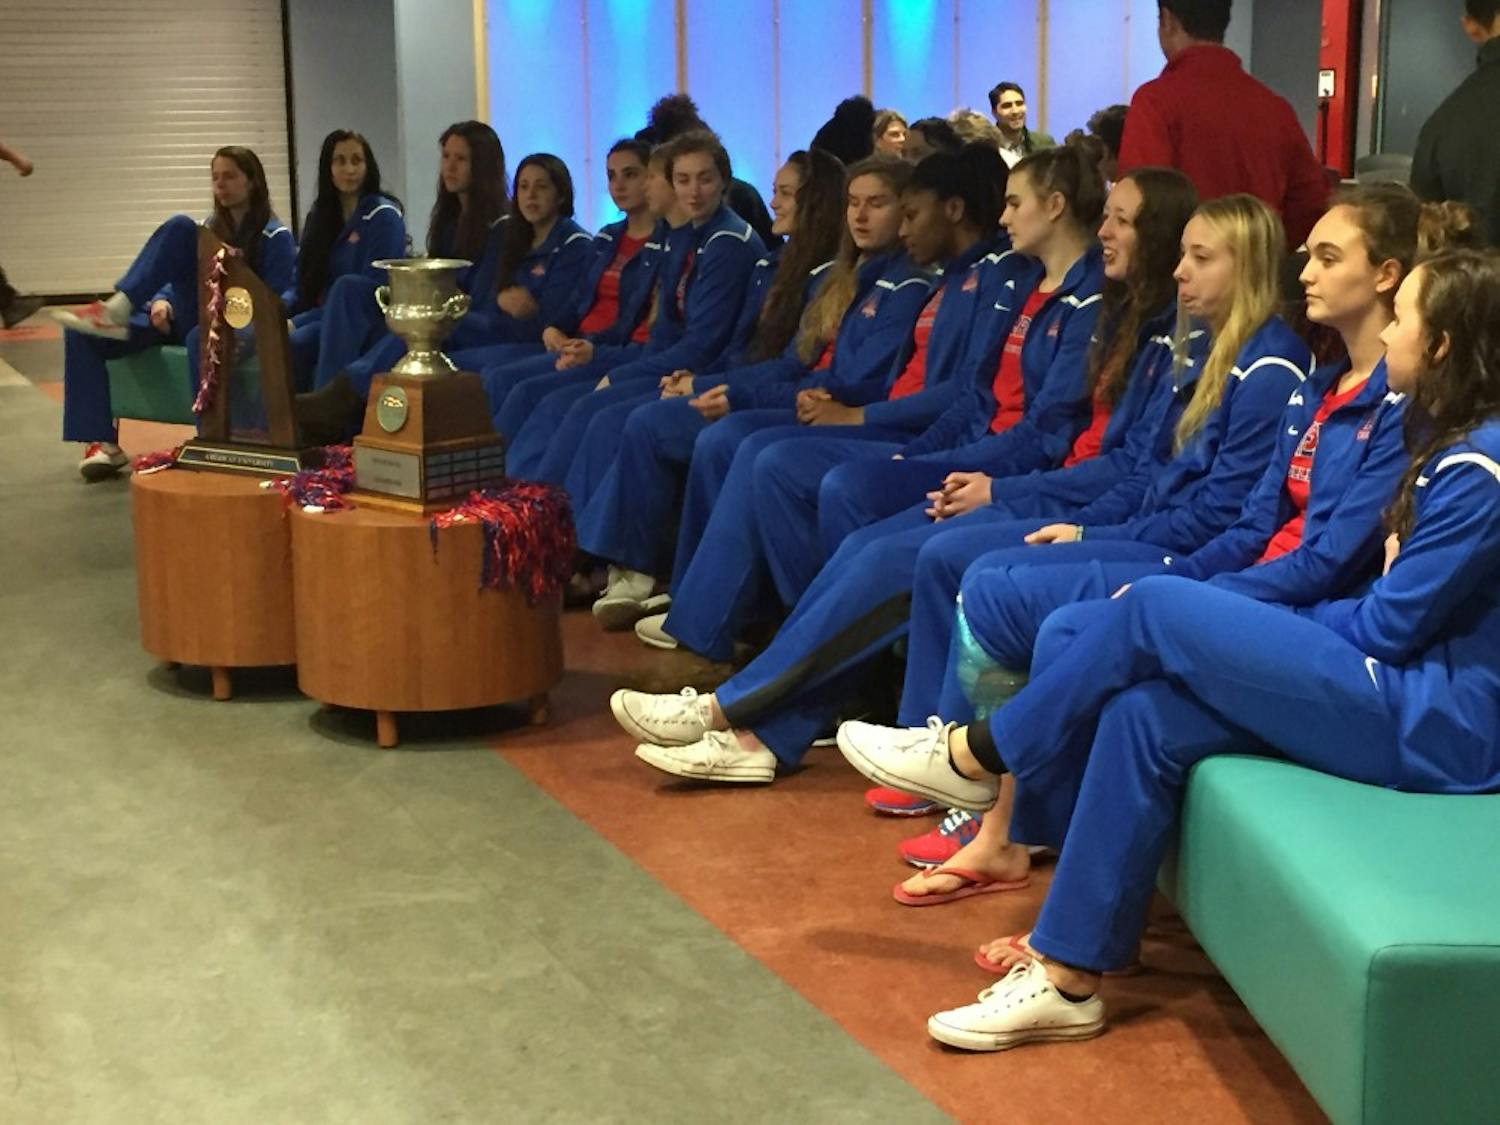 AU volleyball players watch carefully as the NCAA tournament seeds are announced.&nbsp;